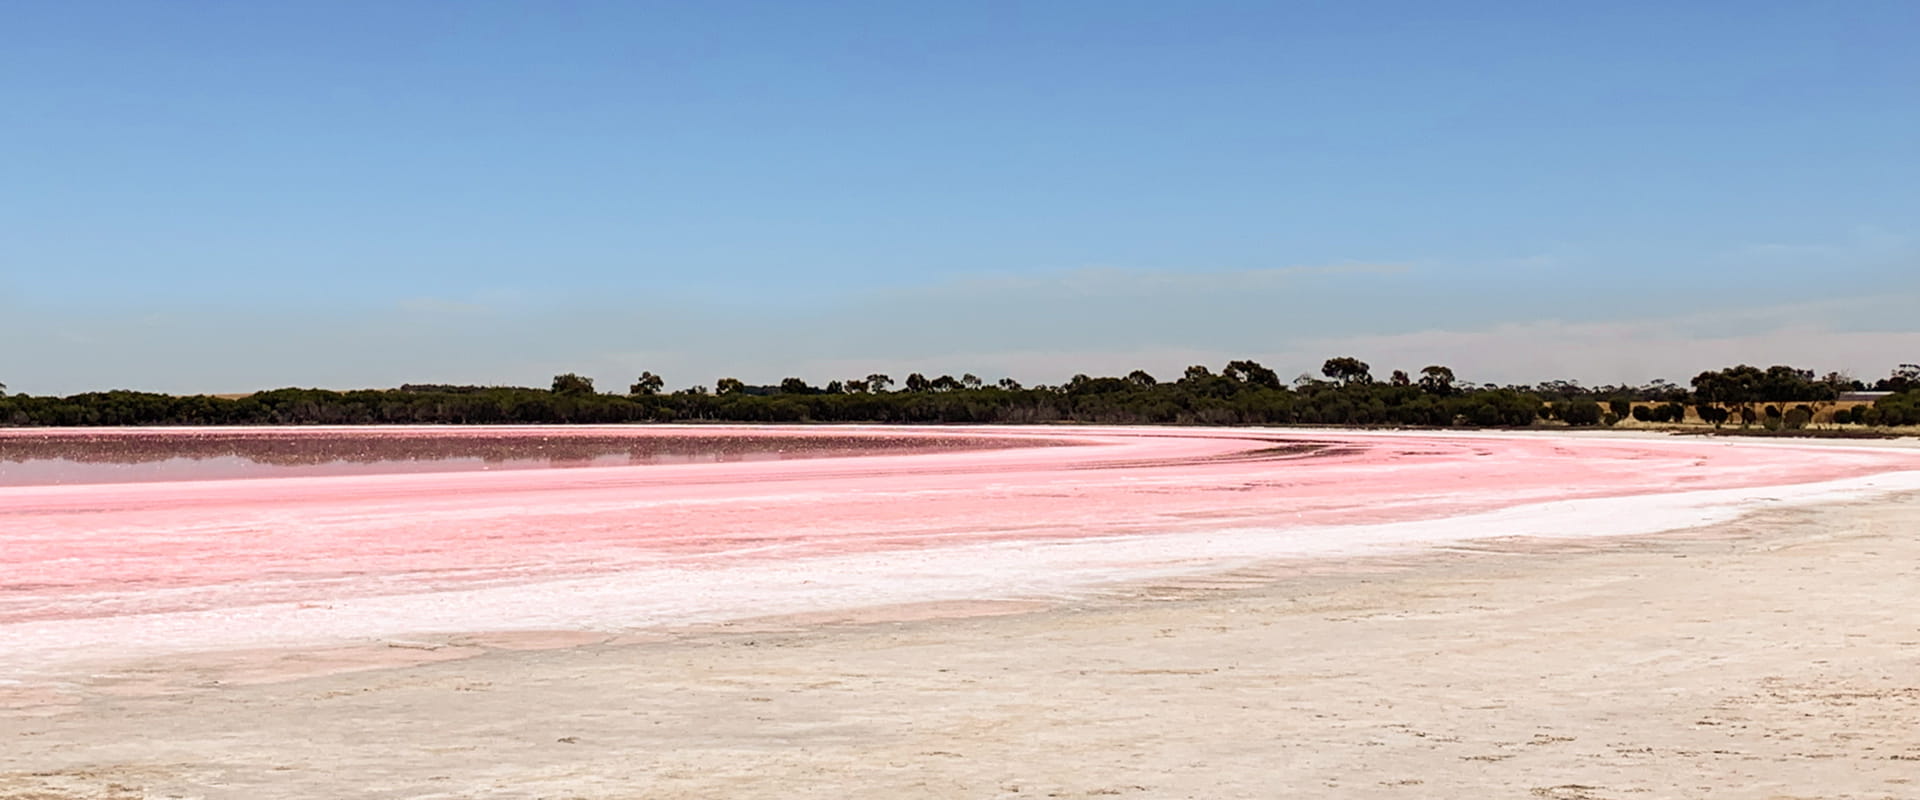 A lake that is low in capacity, with the water's edge surrounded in pink salt.